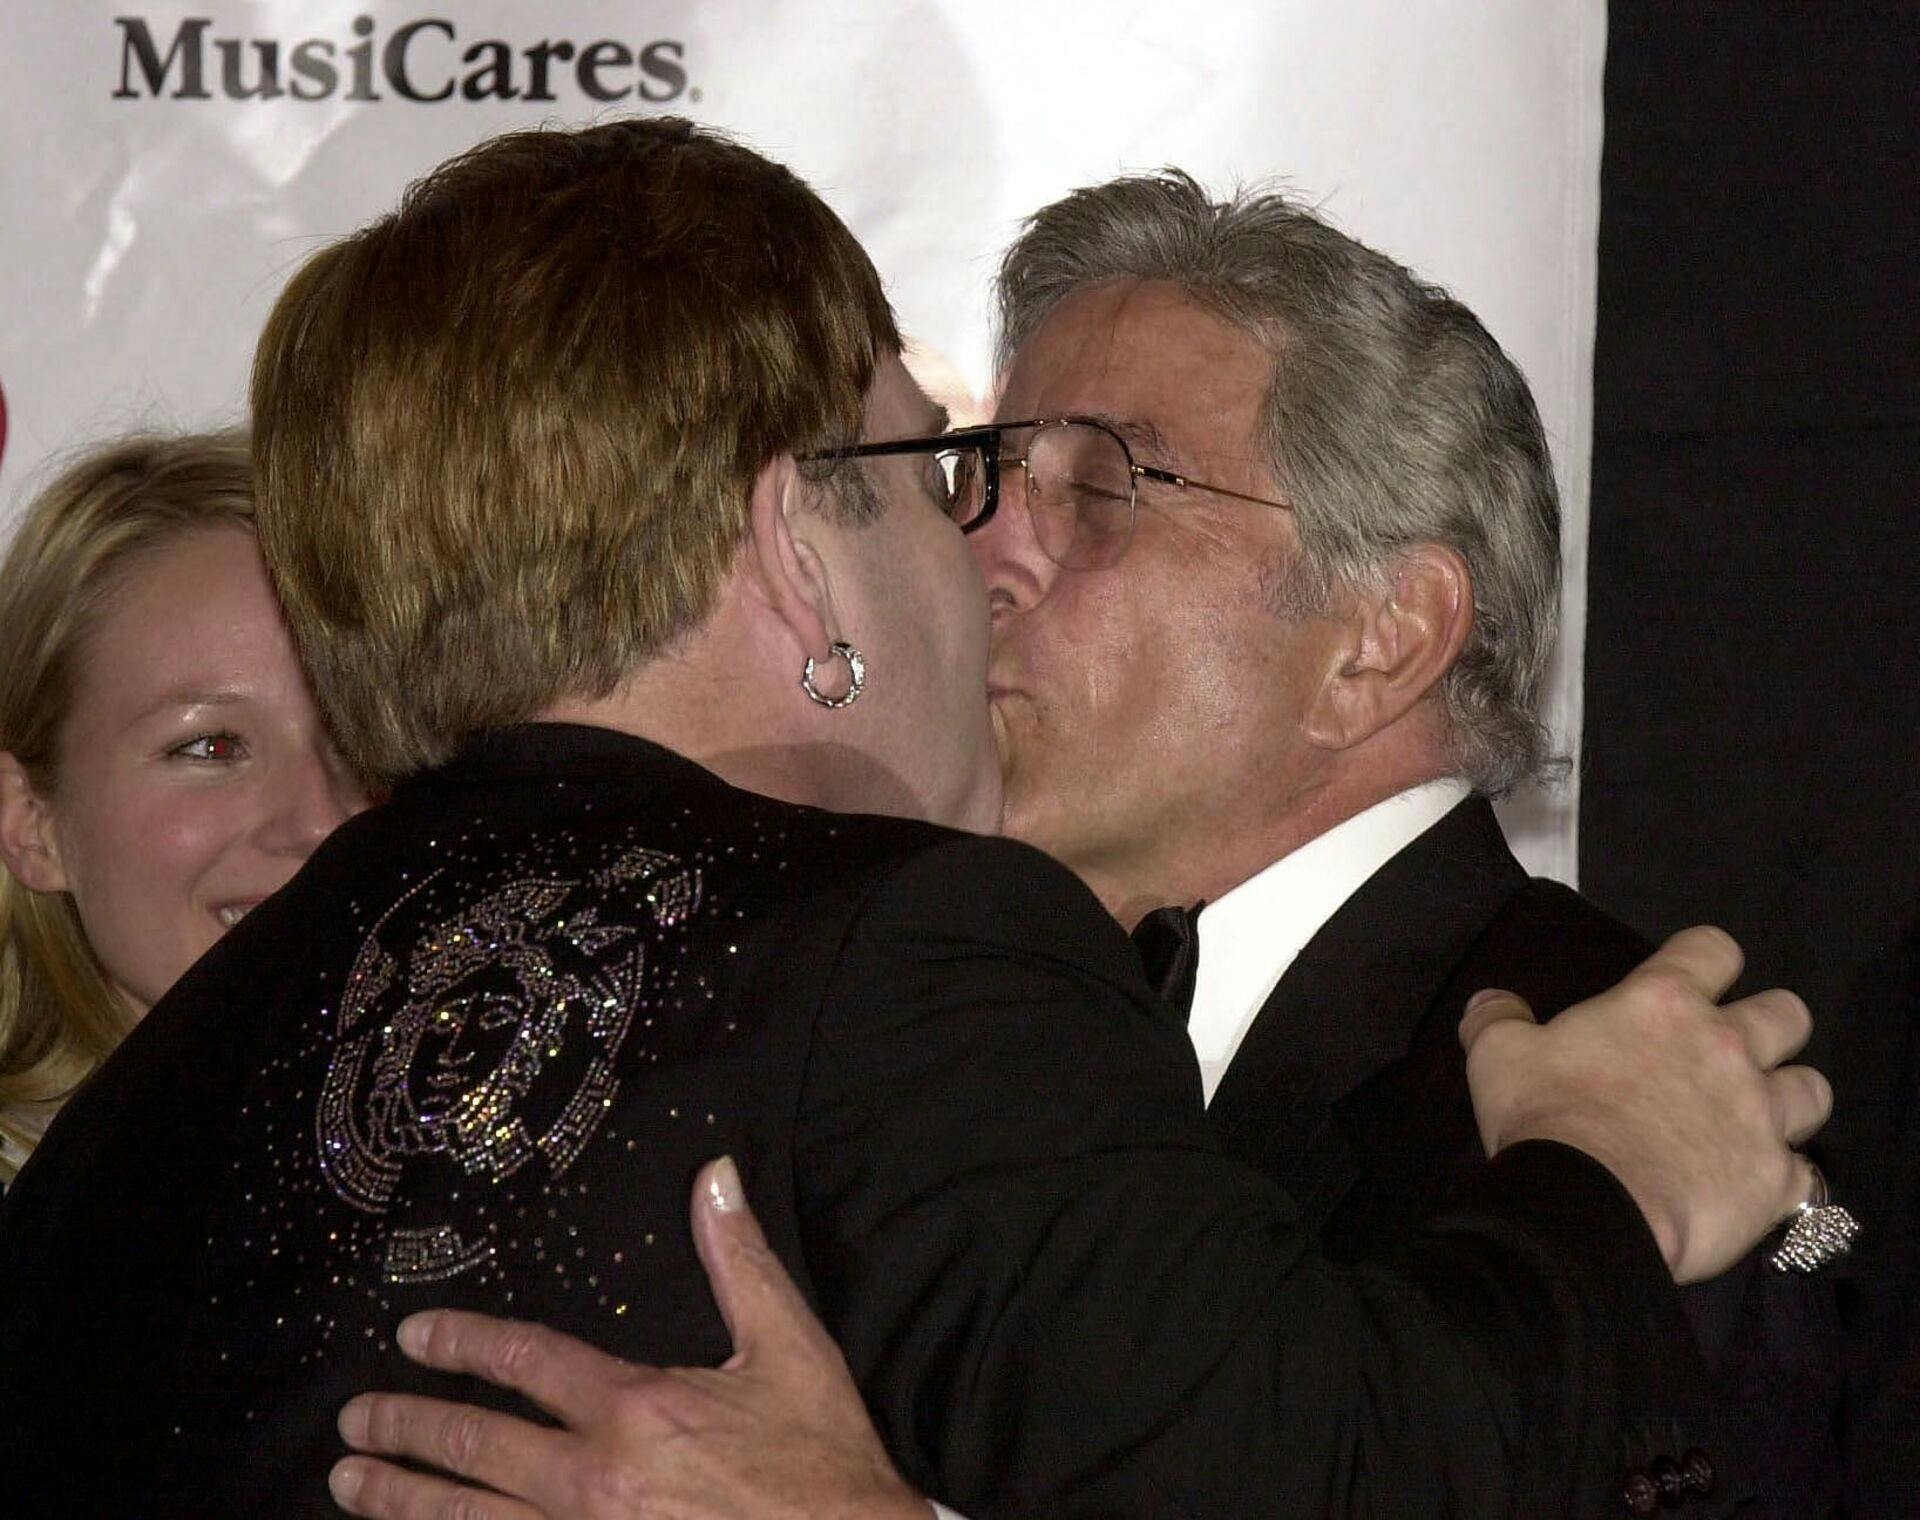 Sir Elton John (L) kisses singer Tony Bennett (R) during a ceremony honoring John with the MusiCares Person of the Year Award 21 February 2000 in Los Angeles, Ca. The benefit event included performances by Sting, Phil Collins, Bennett and Jewel(L). (ELECTRONIC IMAGE) AFP PHOTO VINCE BUCCI VINCE BUCCI / AFP